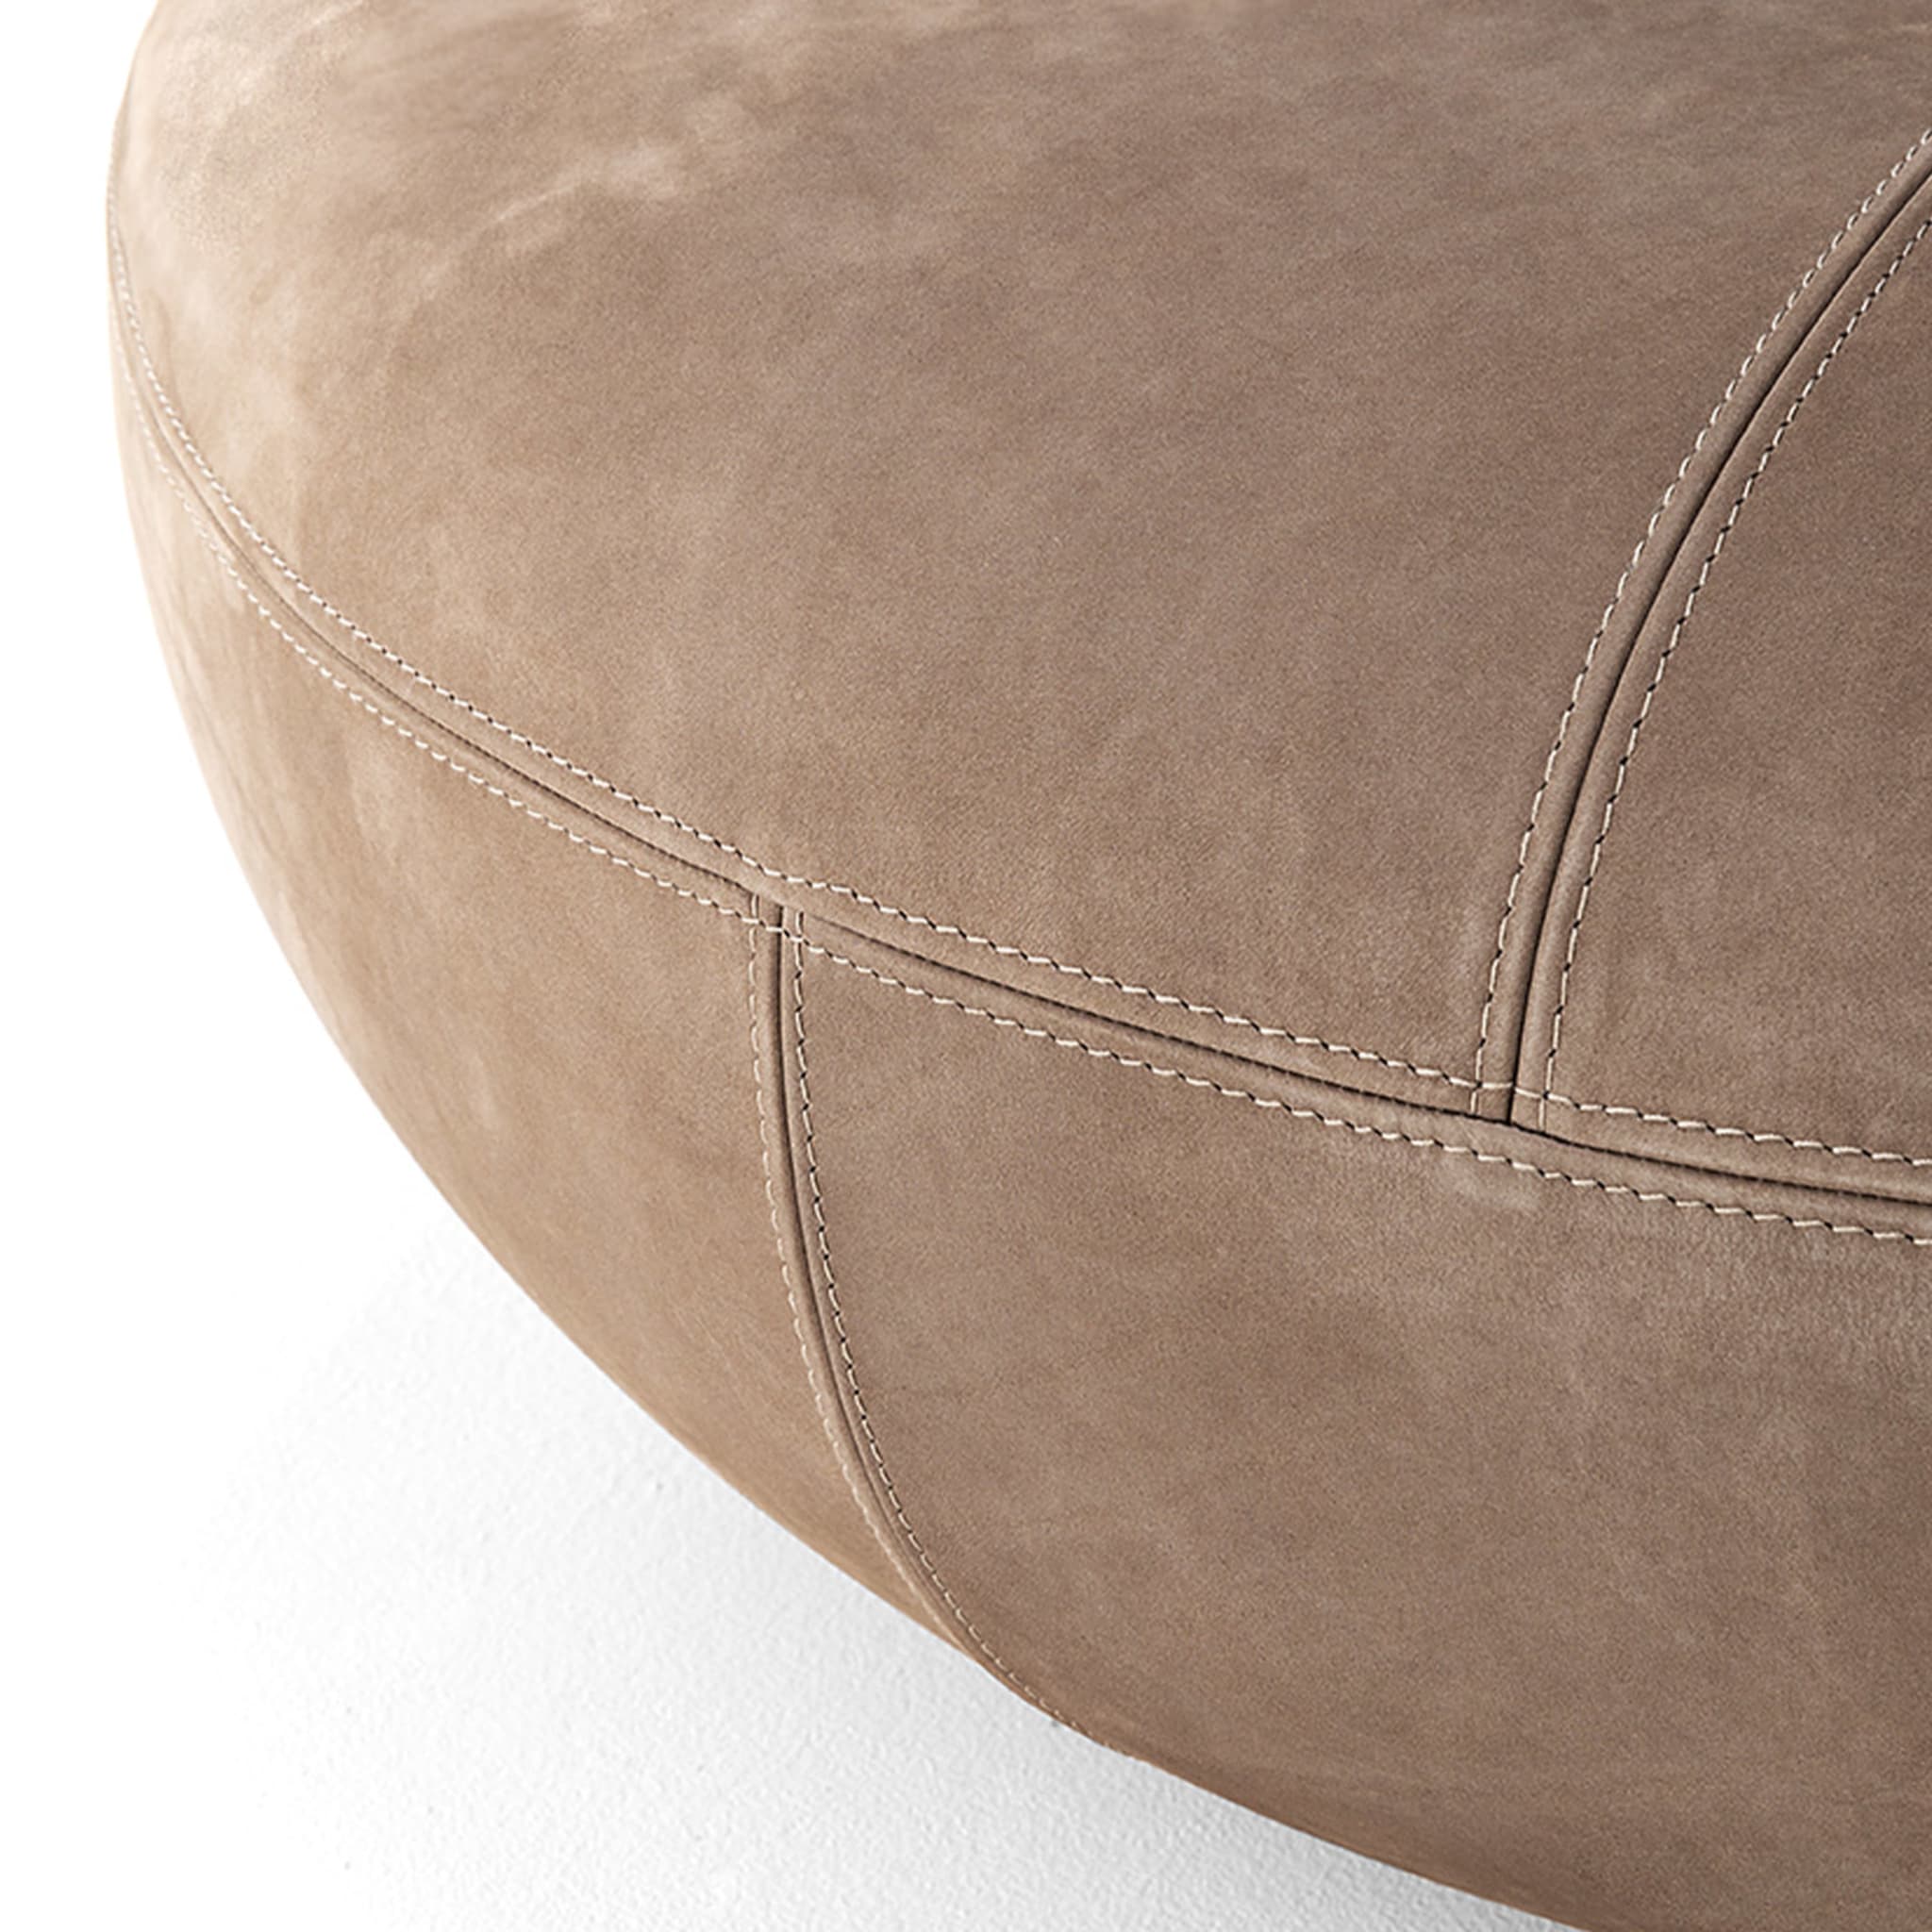 10TH Clove Large Gray Pouf by Massimo Castagna - Alternative view 1